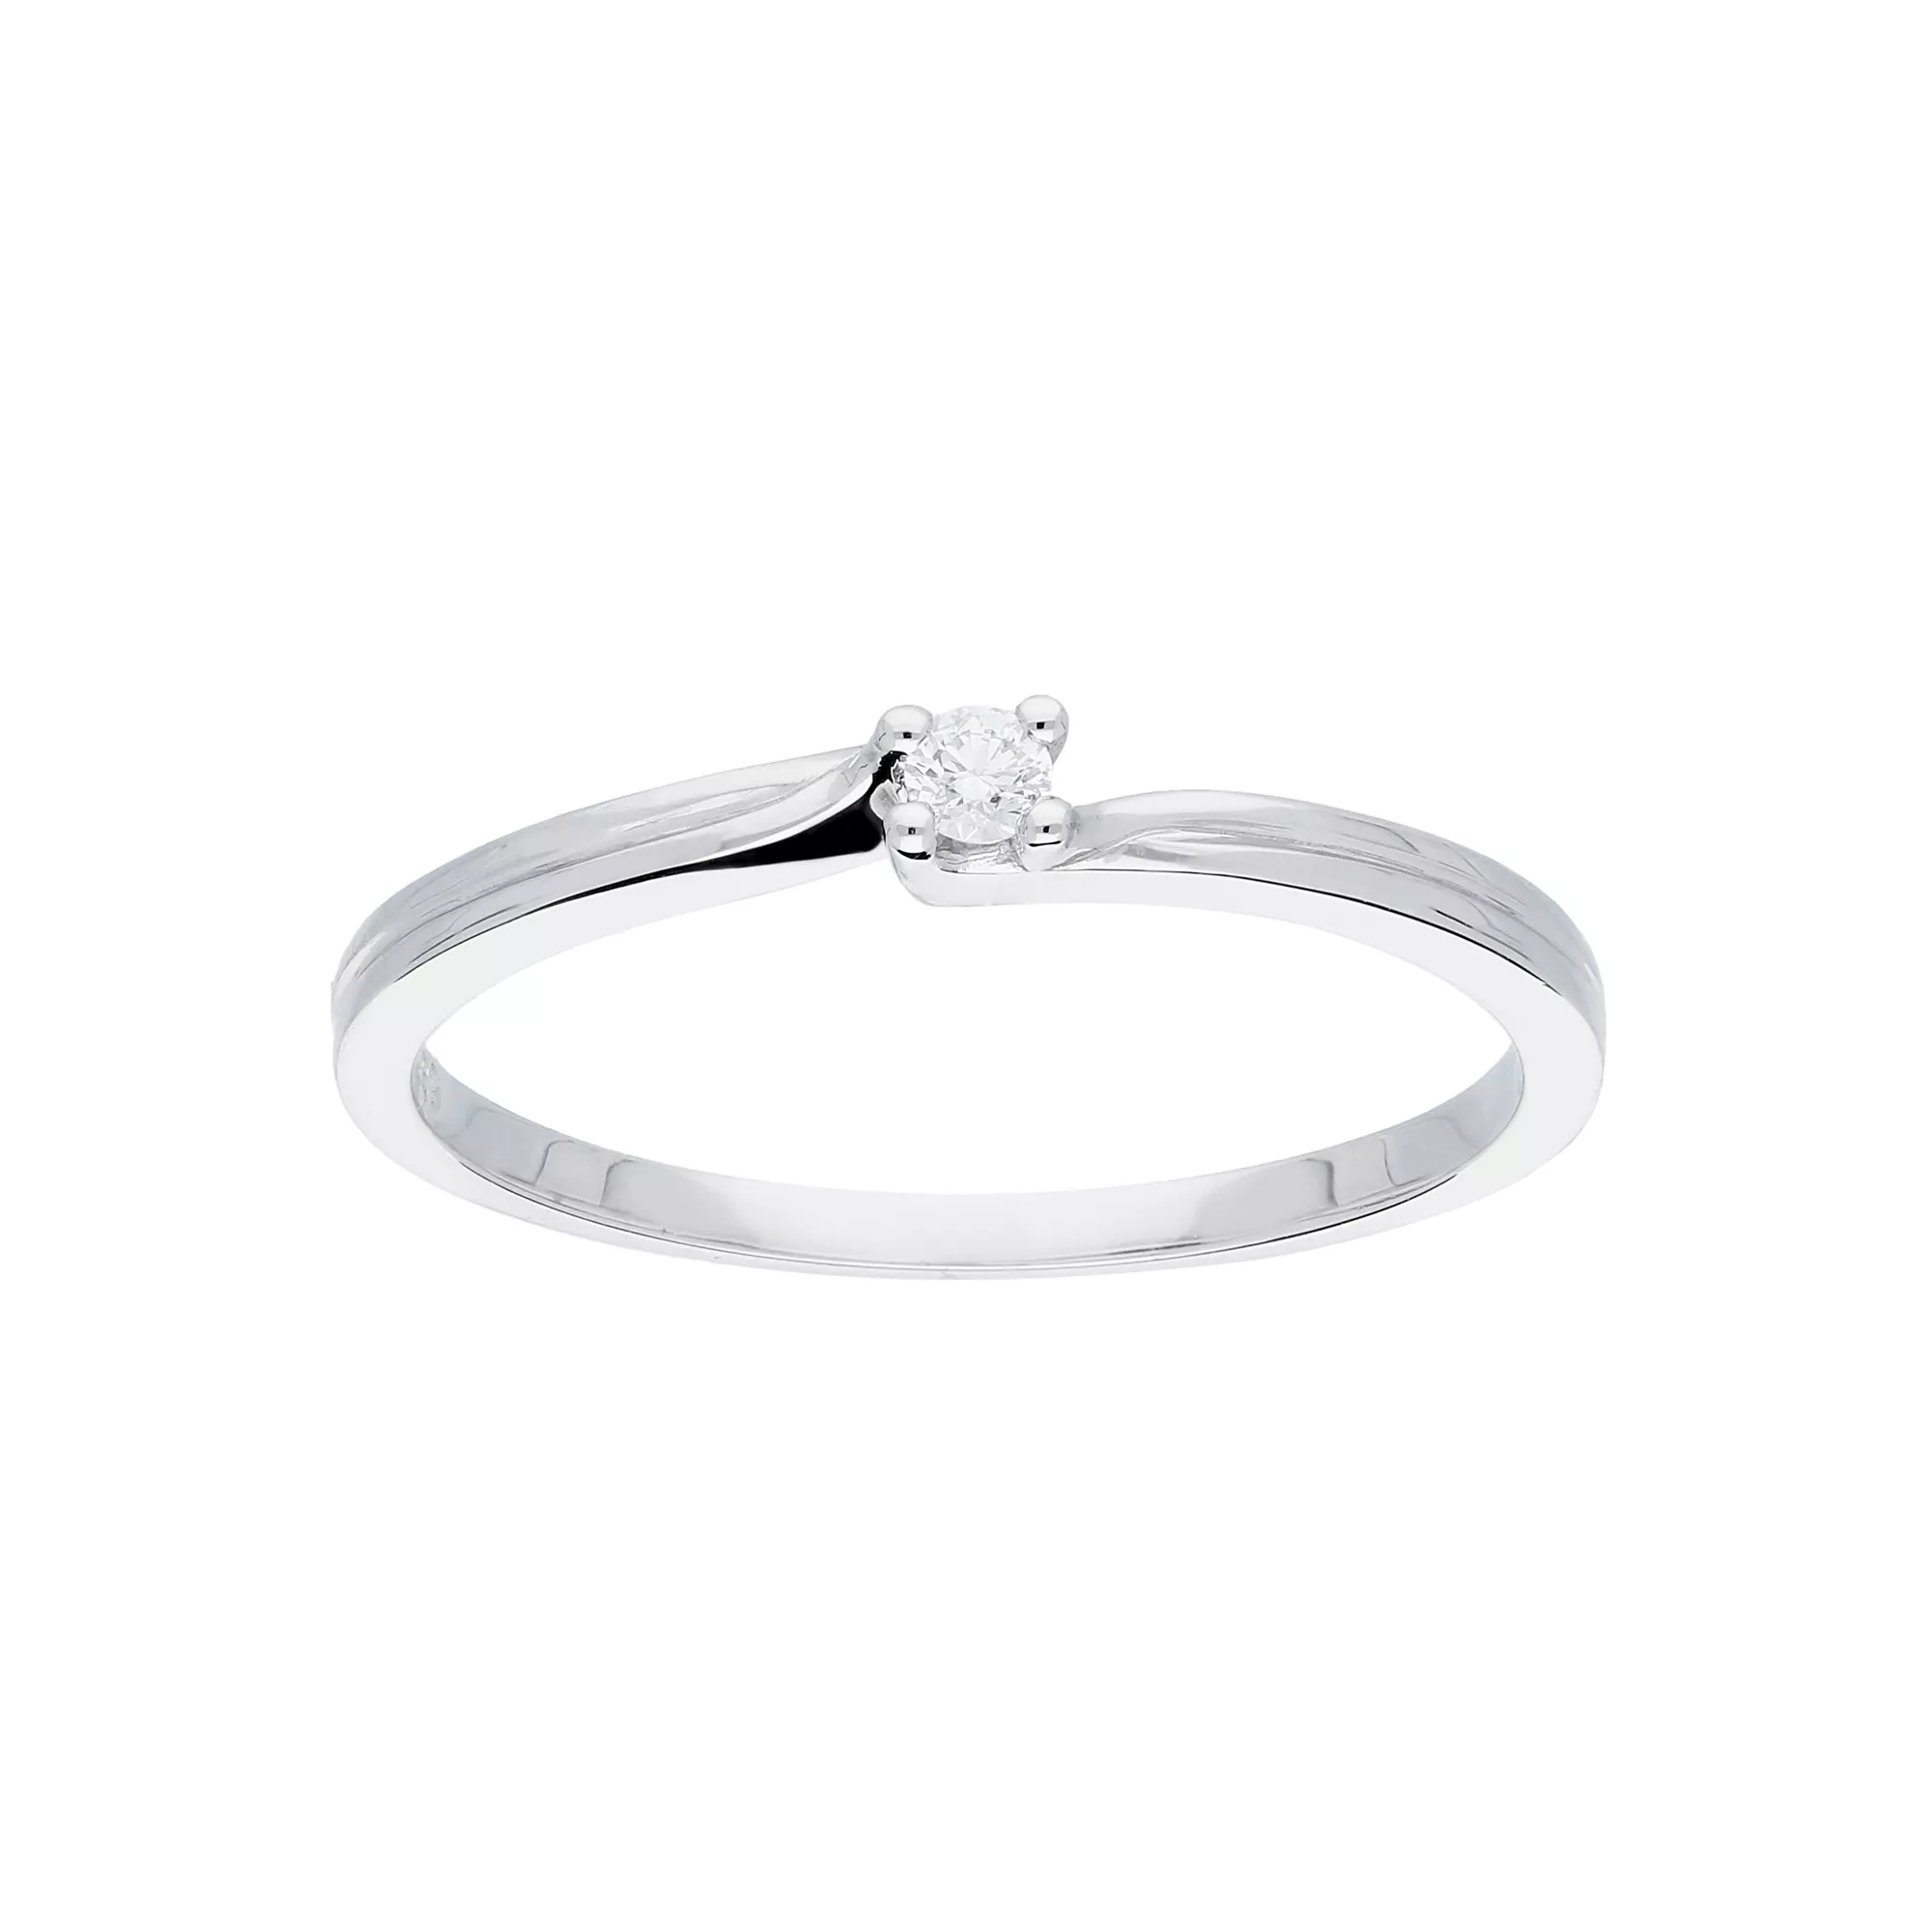 Glow Witgouden Ring - Glanzend Diamant 1- 0.04ct G/si 214.3229.50